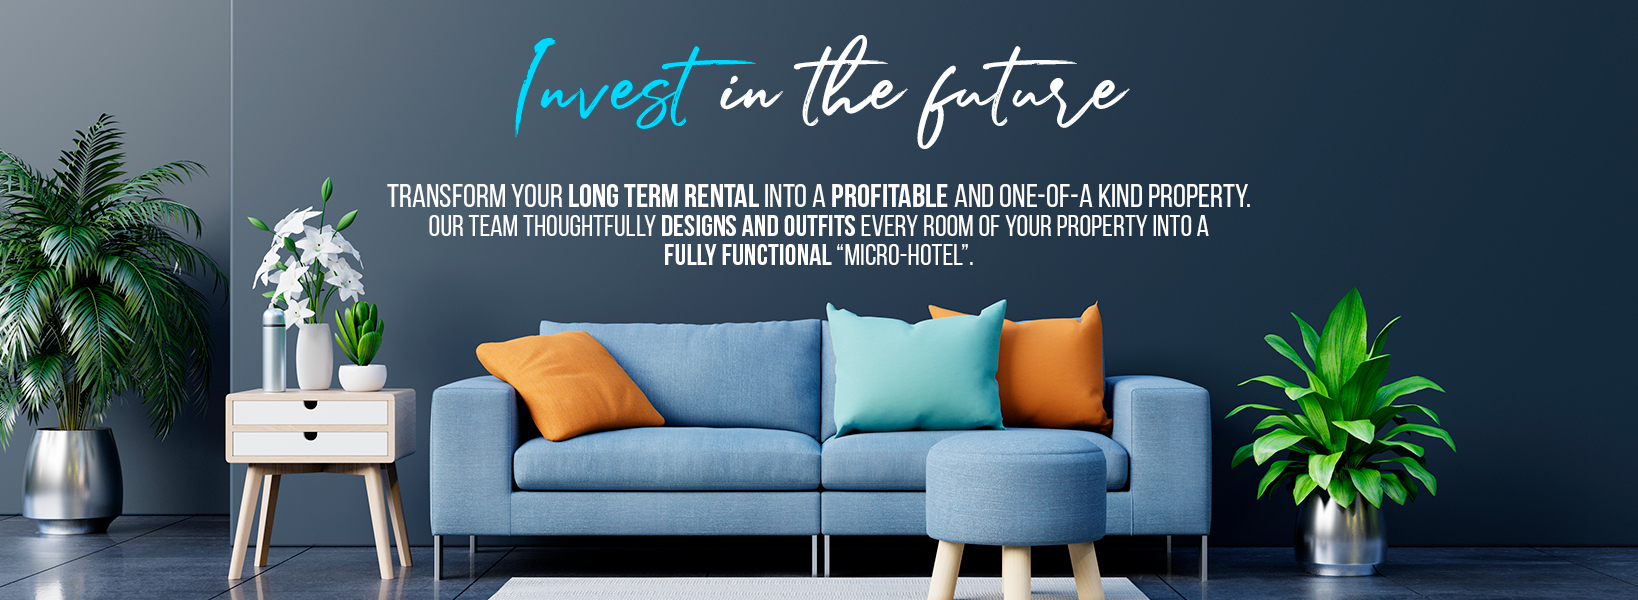 Blue sofa arrangement inside a living room. Invest in the future. Transform your long term rental into a profitable and one-of-a-kind property.